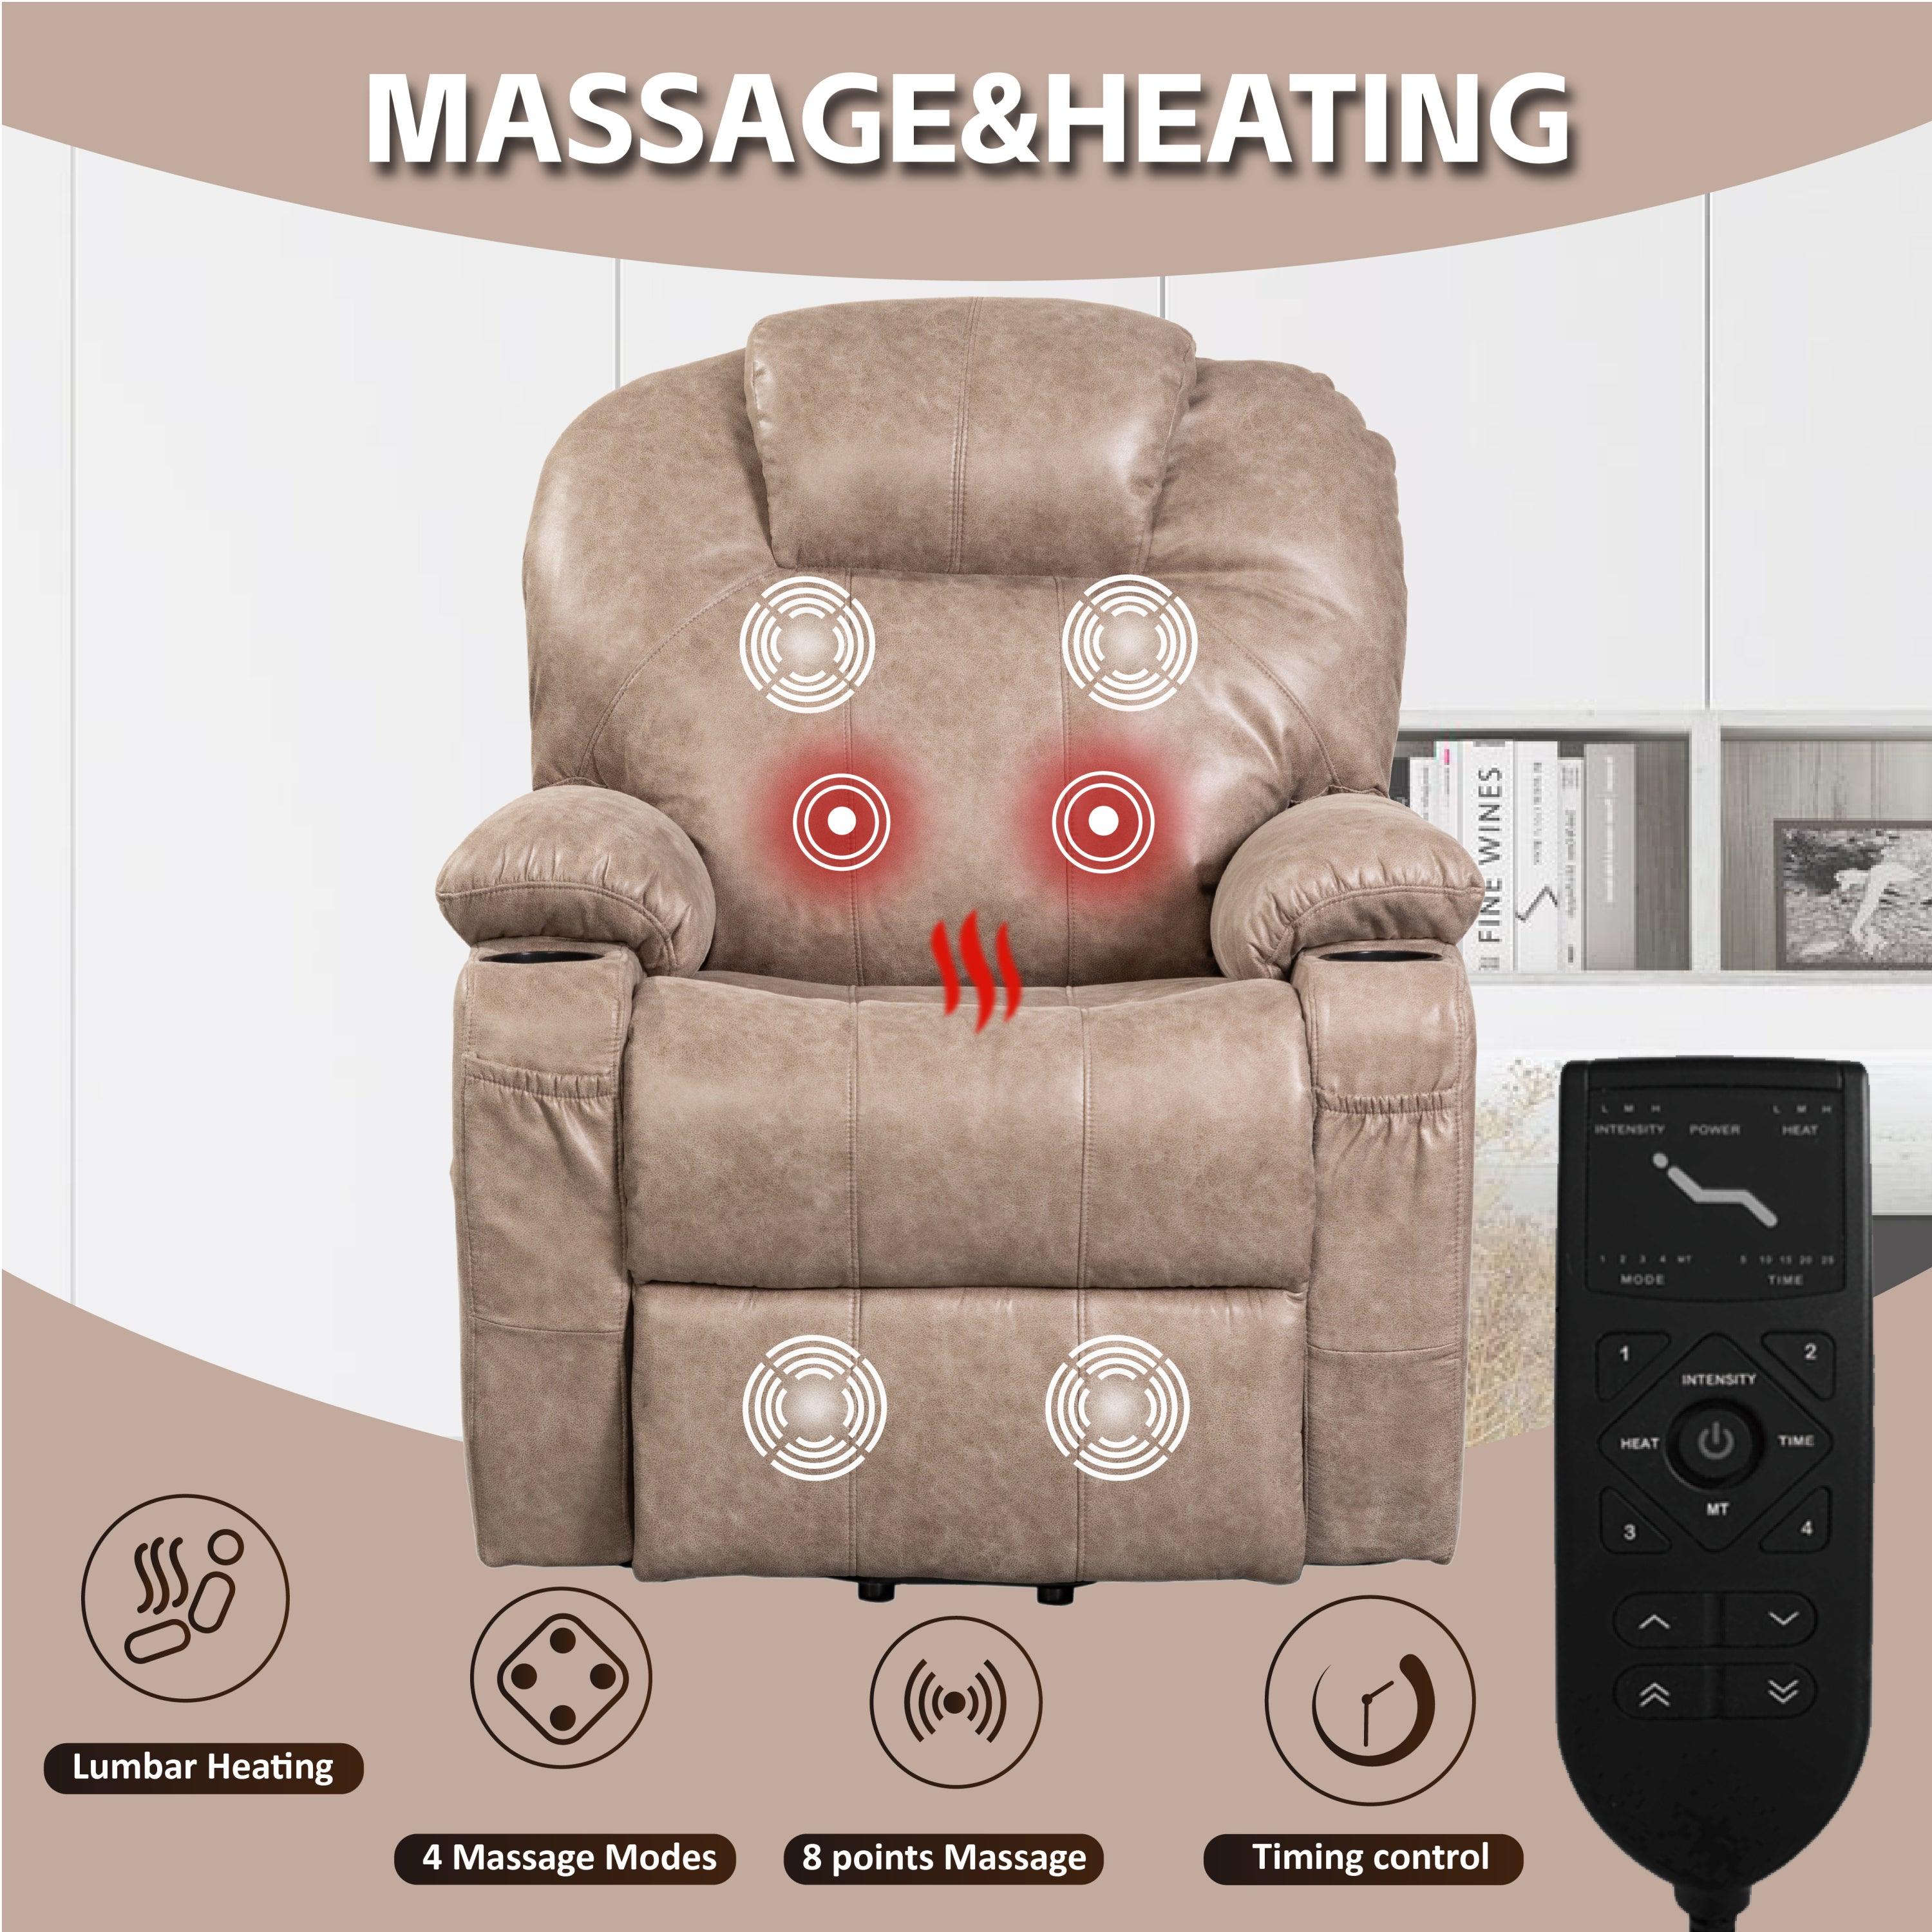 Lift Chair Recliner with Massage and Heat, Beige